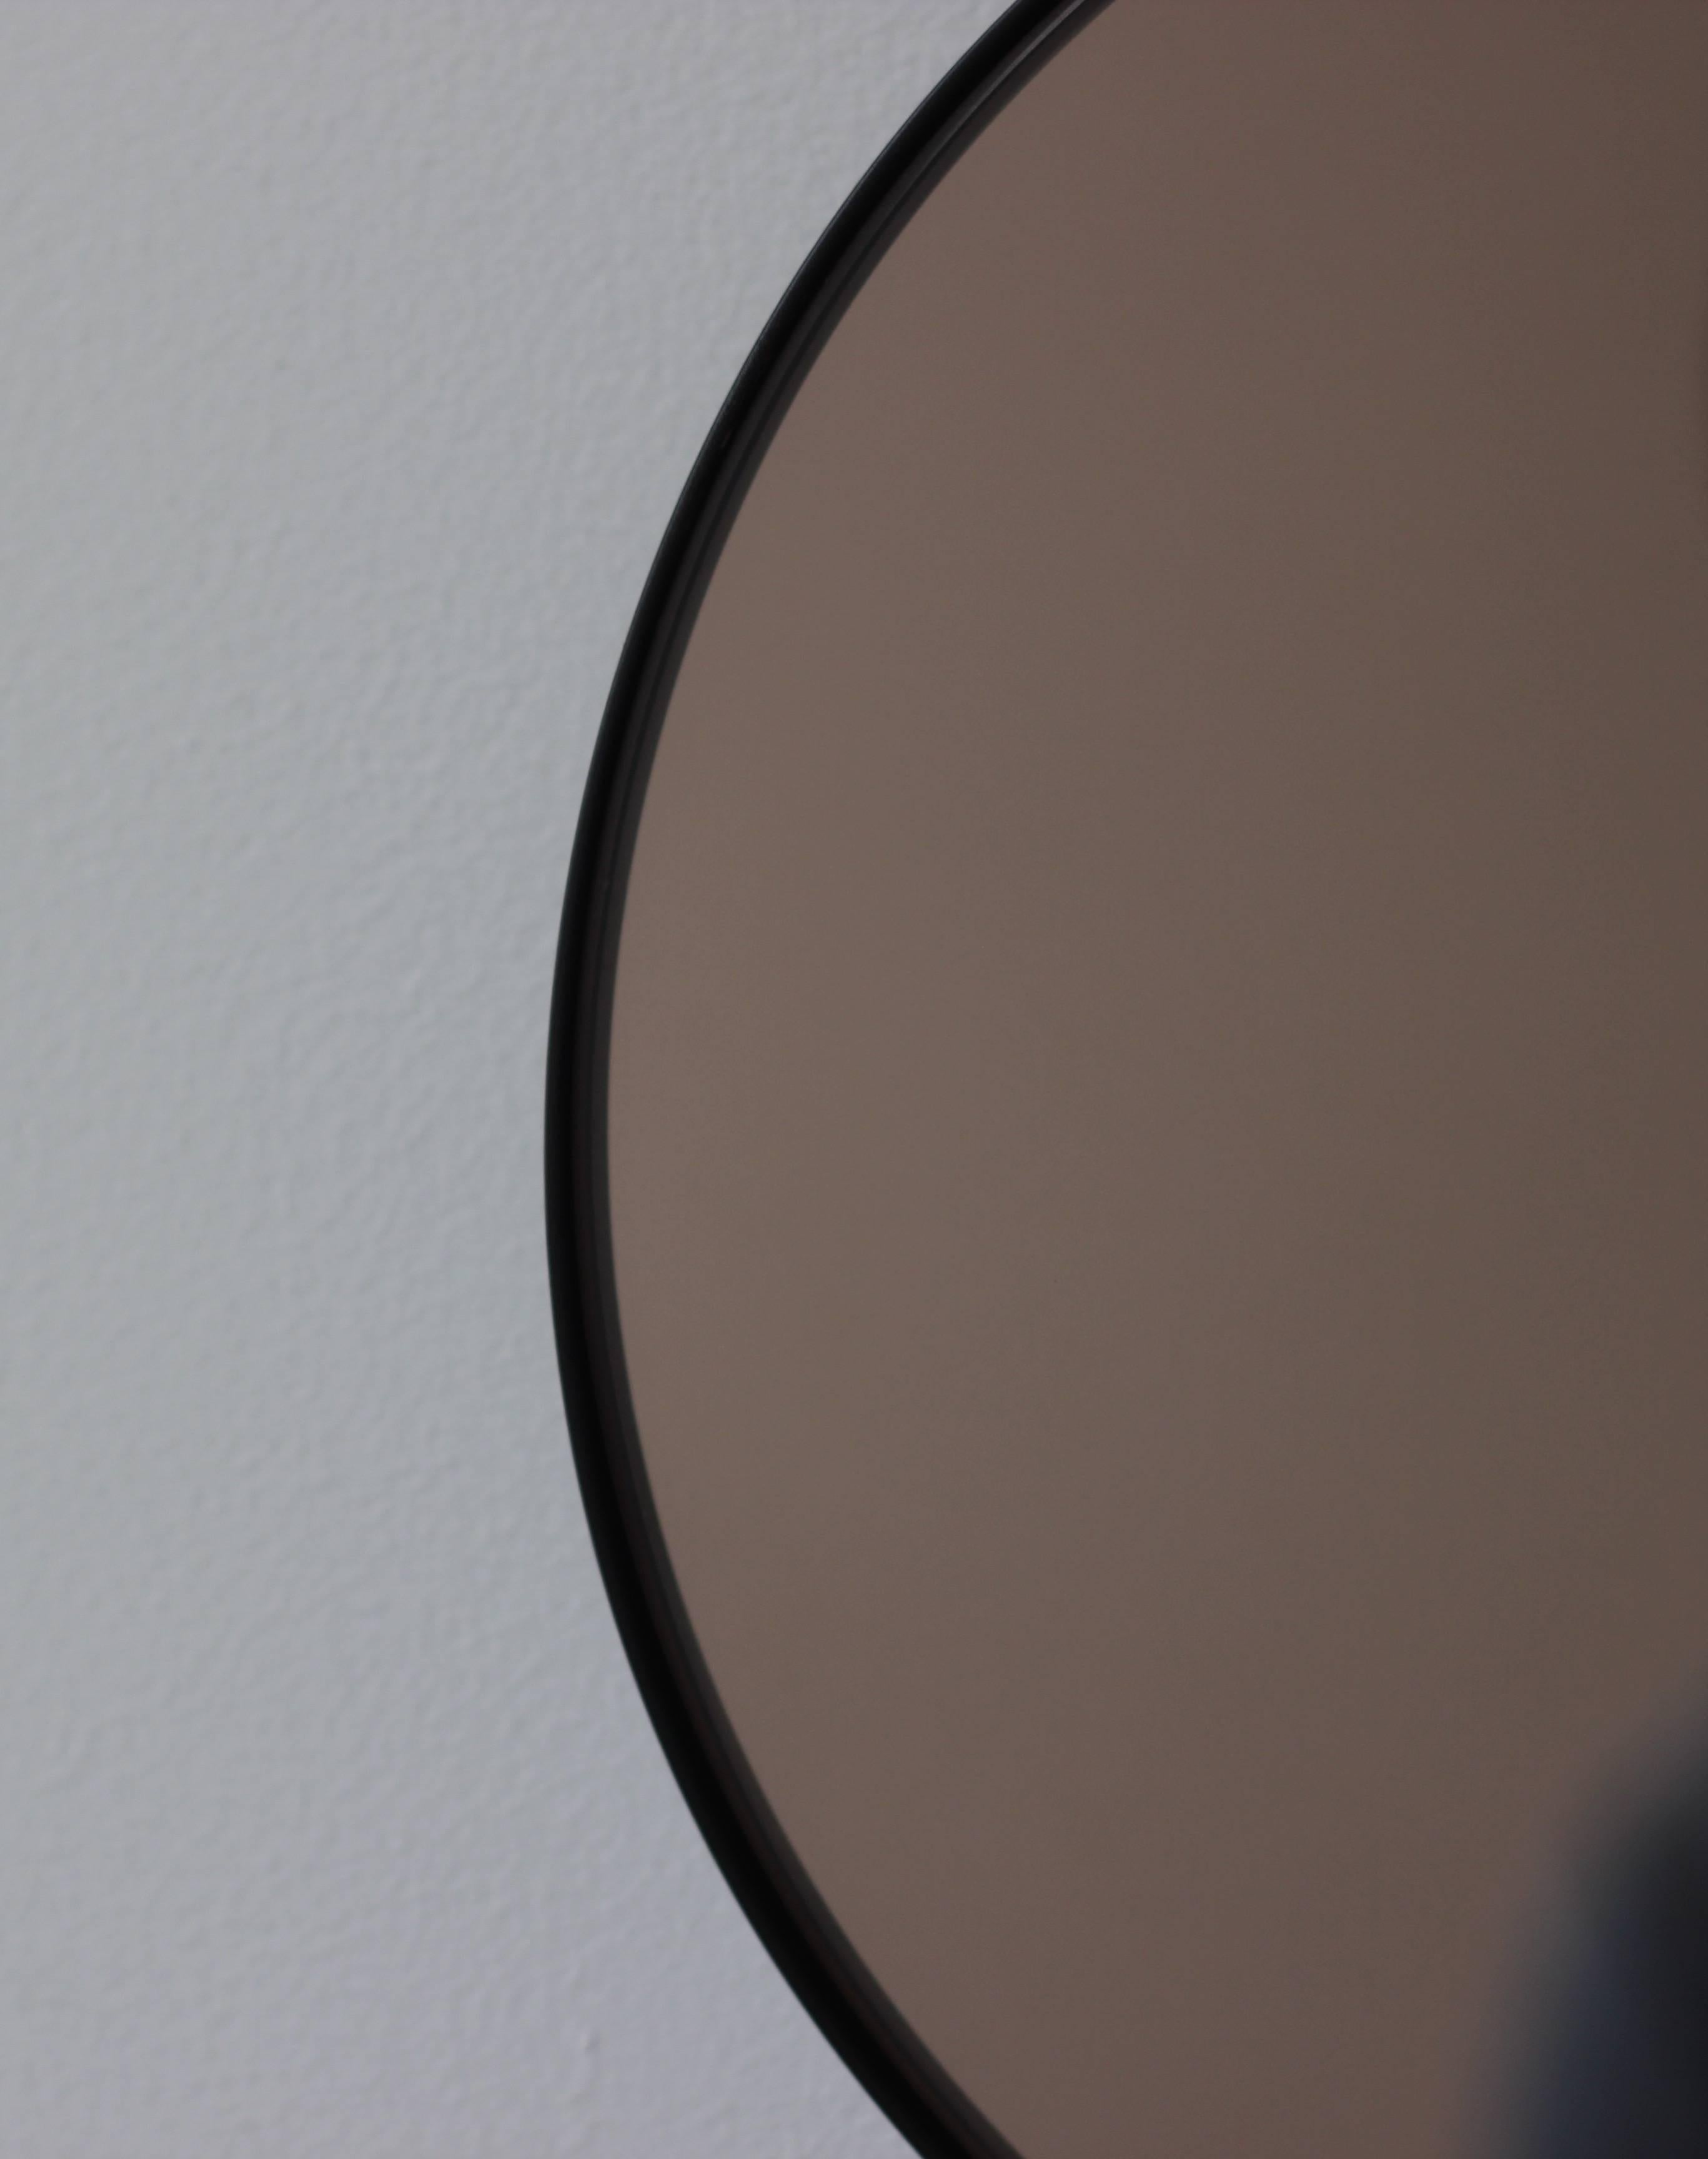 Contemporary Orbis™ round bronze tinted mirror with a minimalist aluminium powder coated black frame. Designed and handcrafted in London, UK.

Medium, large and extra-large mirrors (60, 80 and 100cm) are fitted with an ingenious French cleat (split